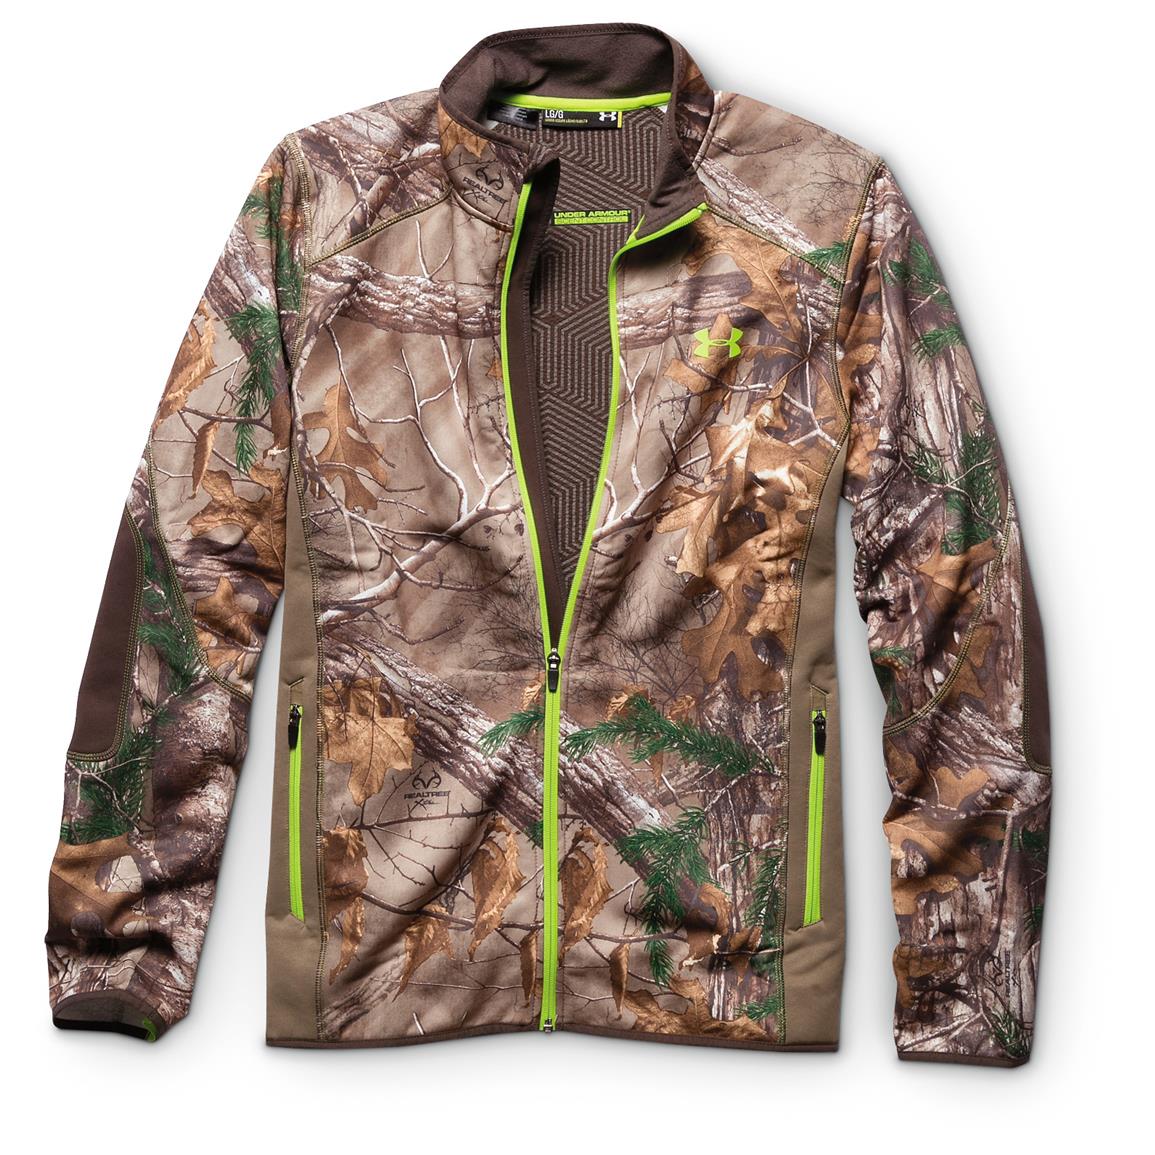 Cheap under armor scent control jacket 